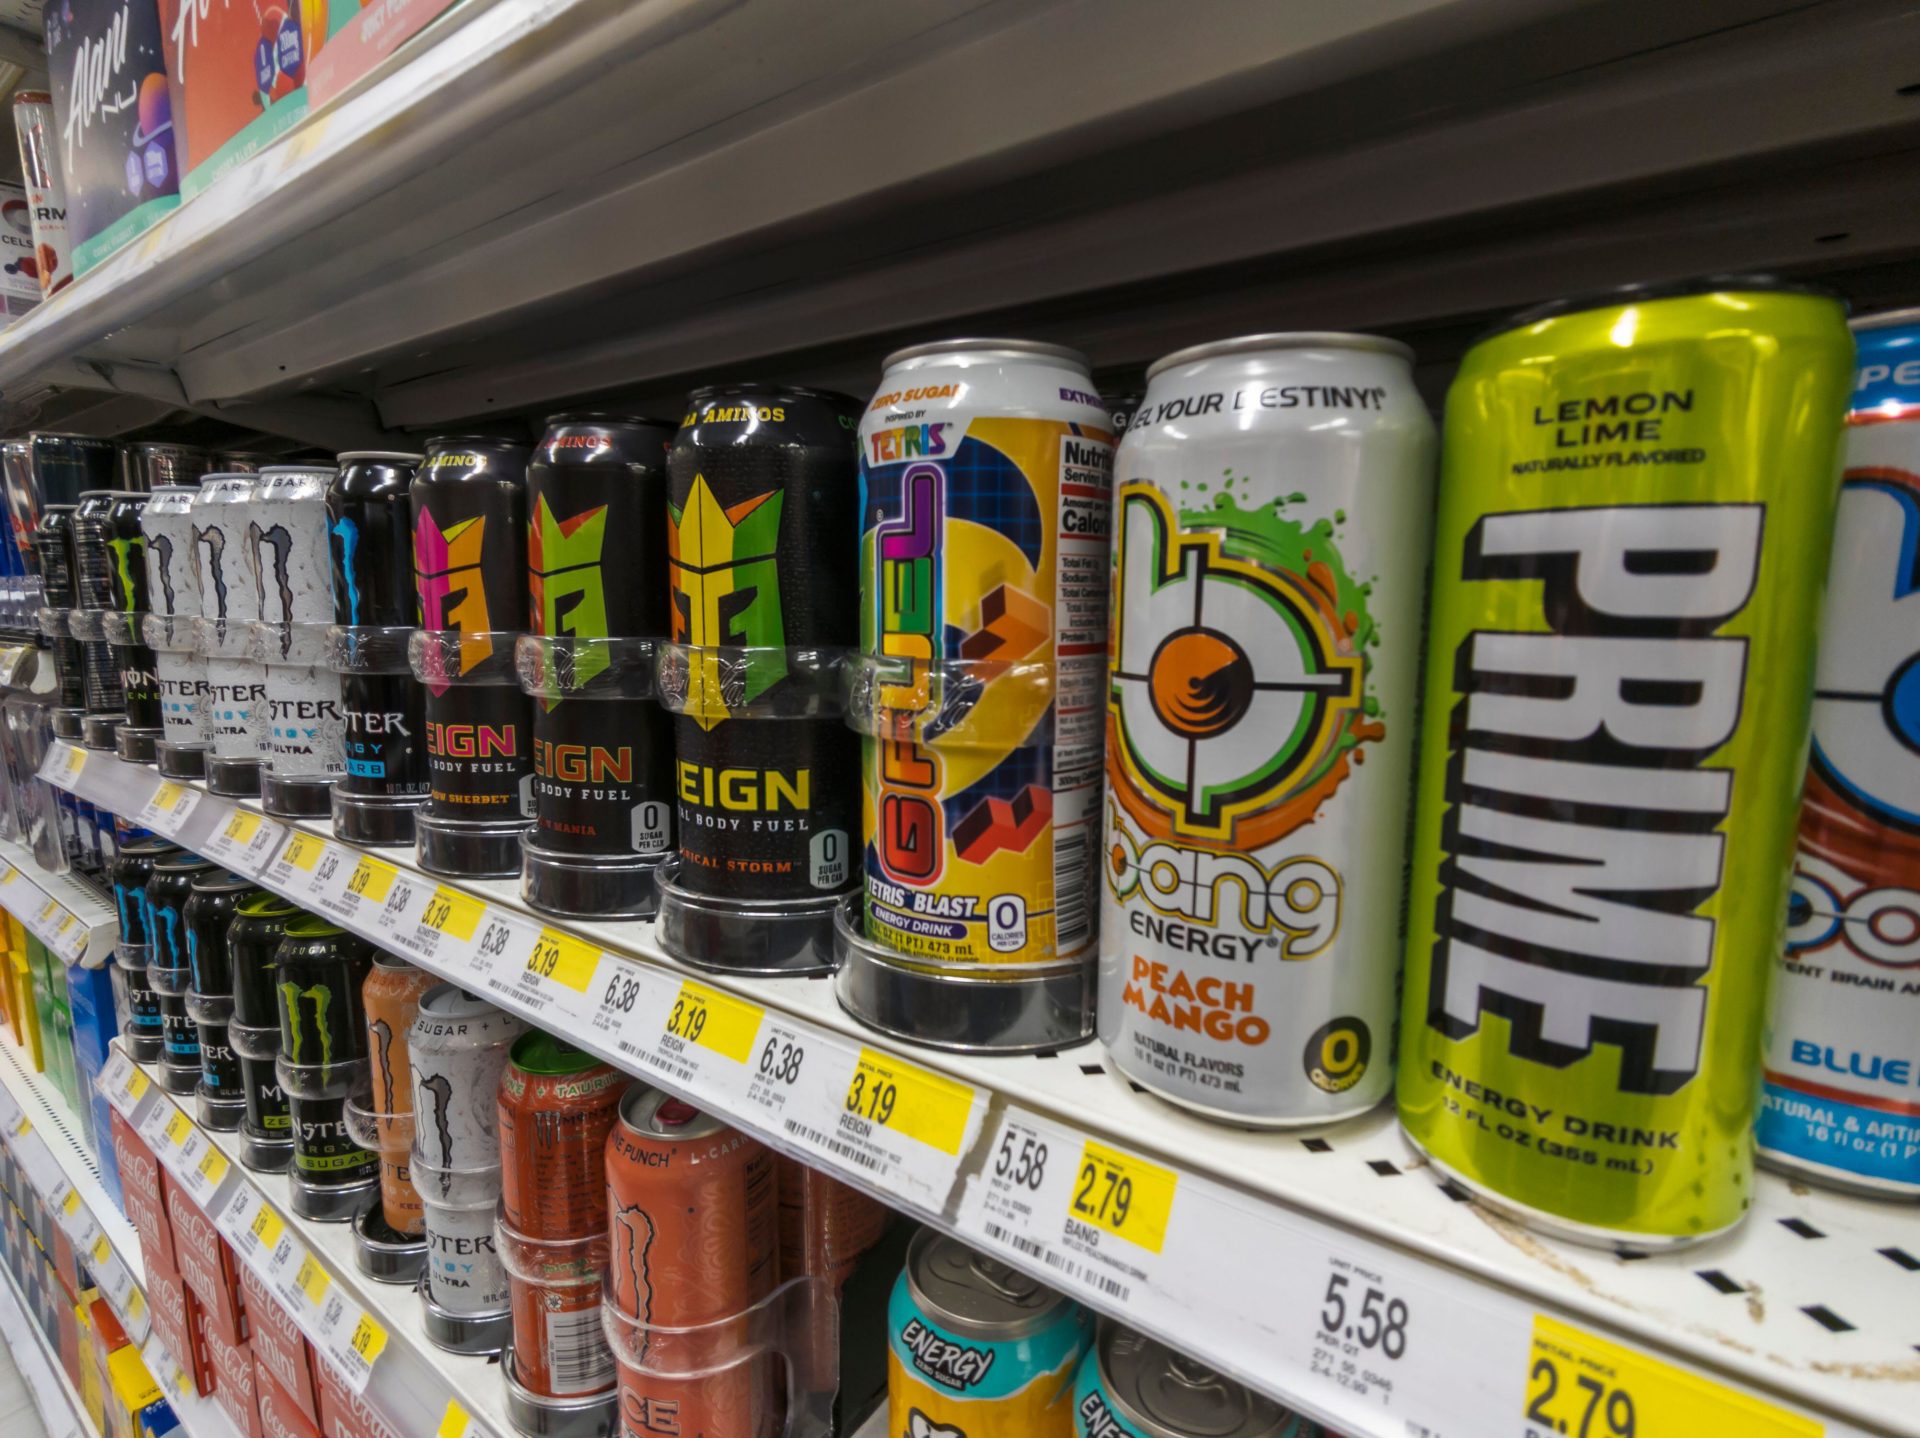 A selection of energy drinks in a shop, including Prime Energy.